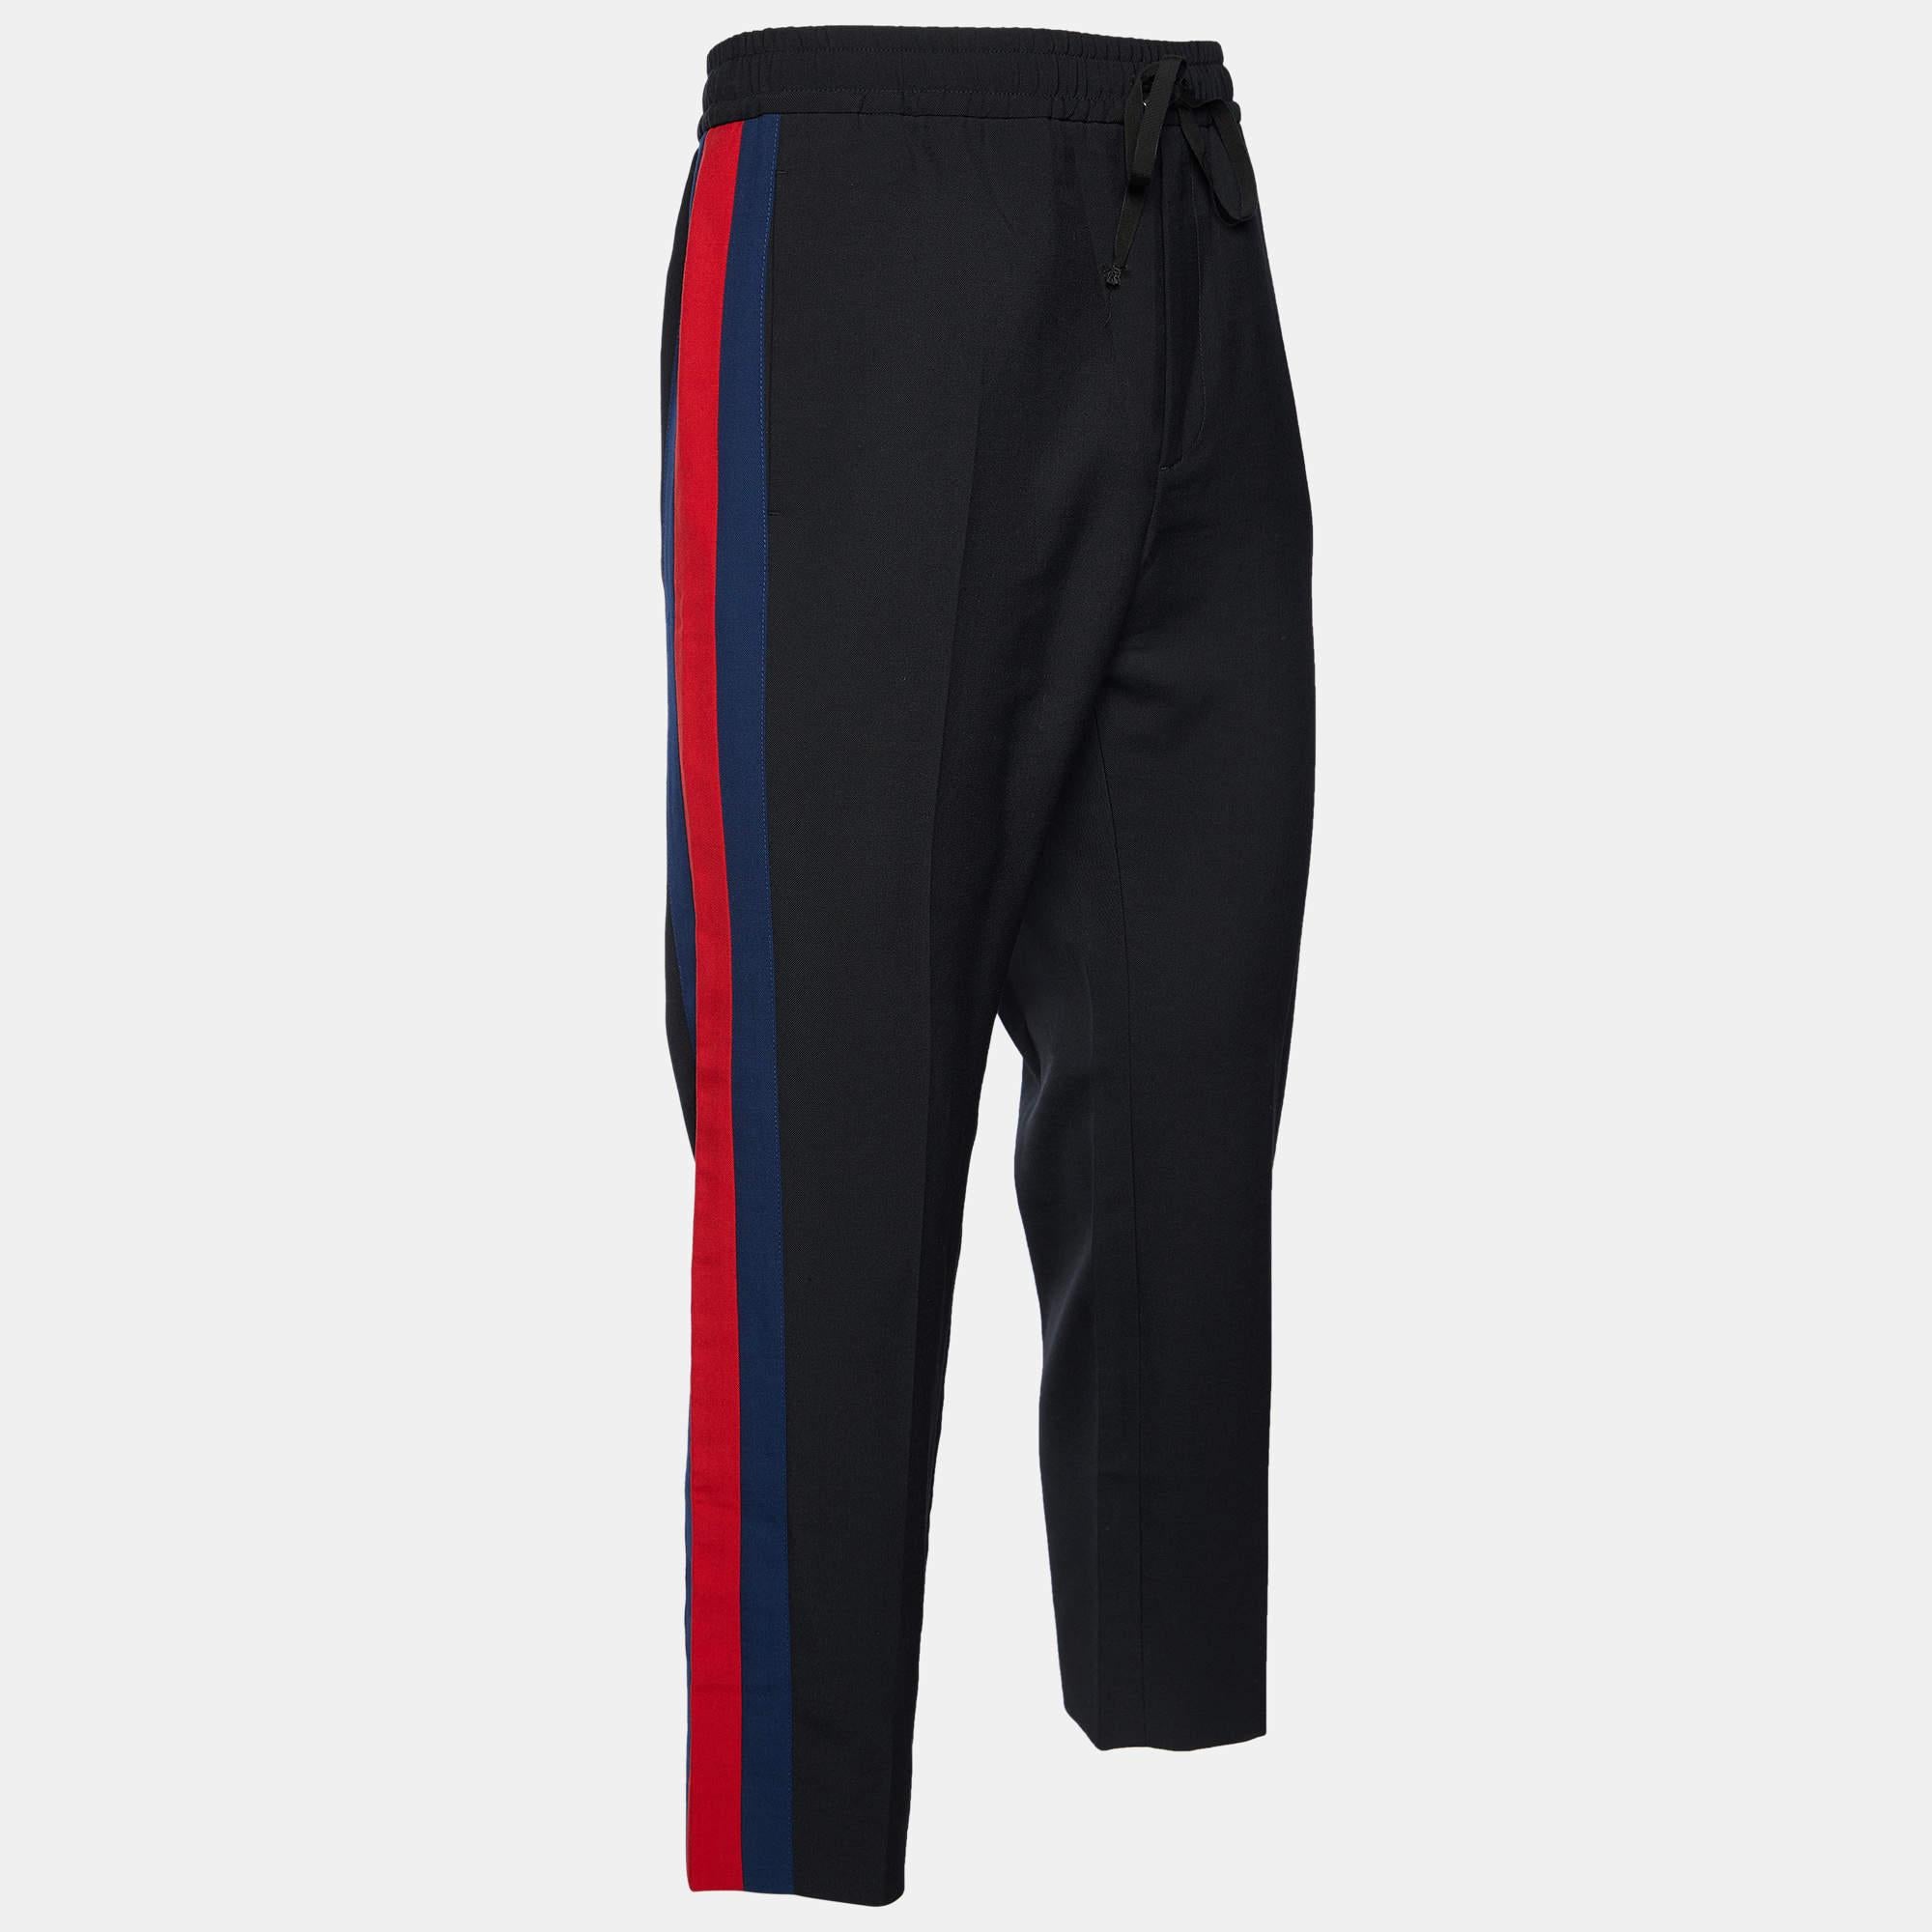 How stylish and classy are these Gucci pants! Made from quality fabrics and styled into a great fit, complement these pants with a stylish t-shirt.

